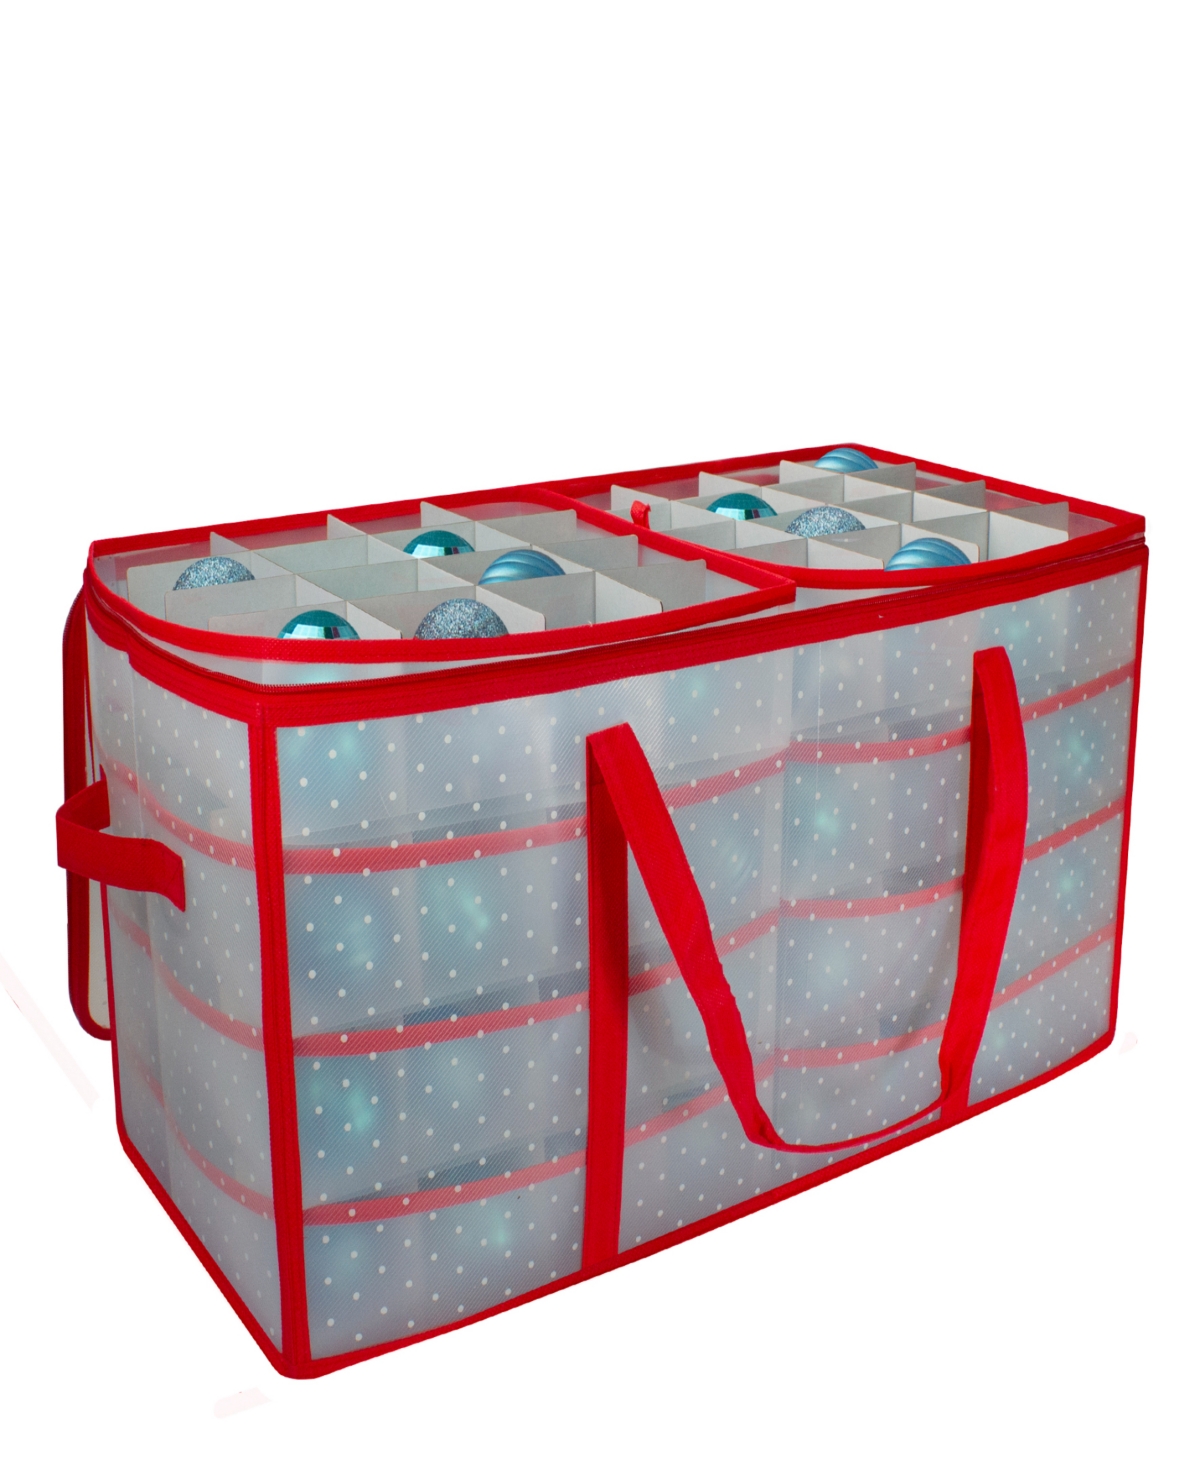 26.25" Transparent Zip Up Christmas Storage Box, Holds 128 Ornaments - Clear